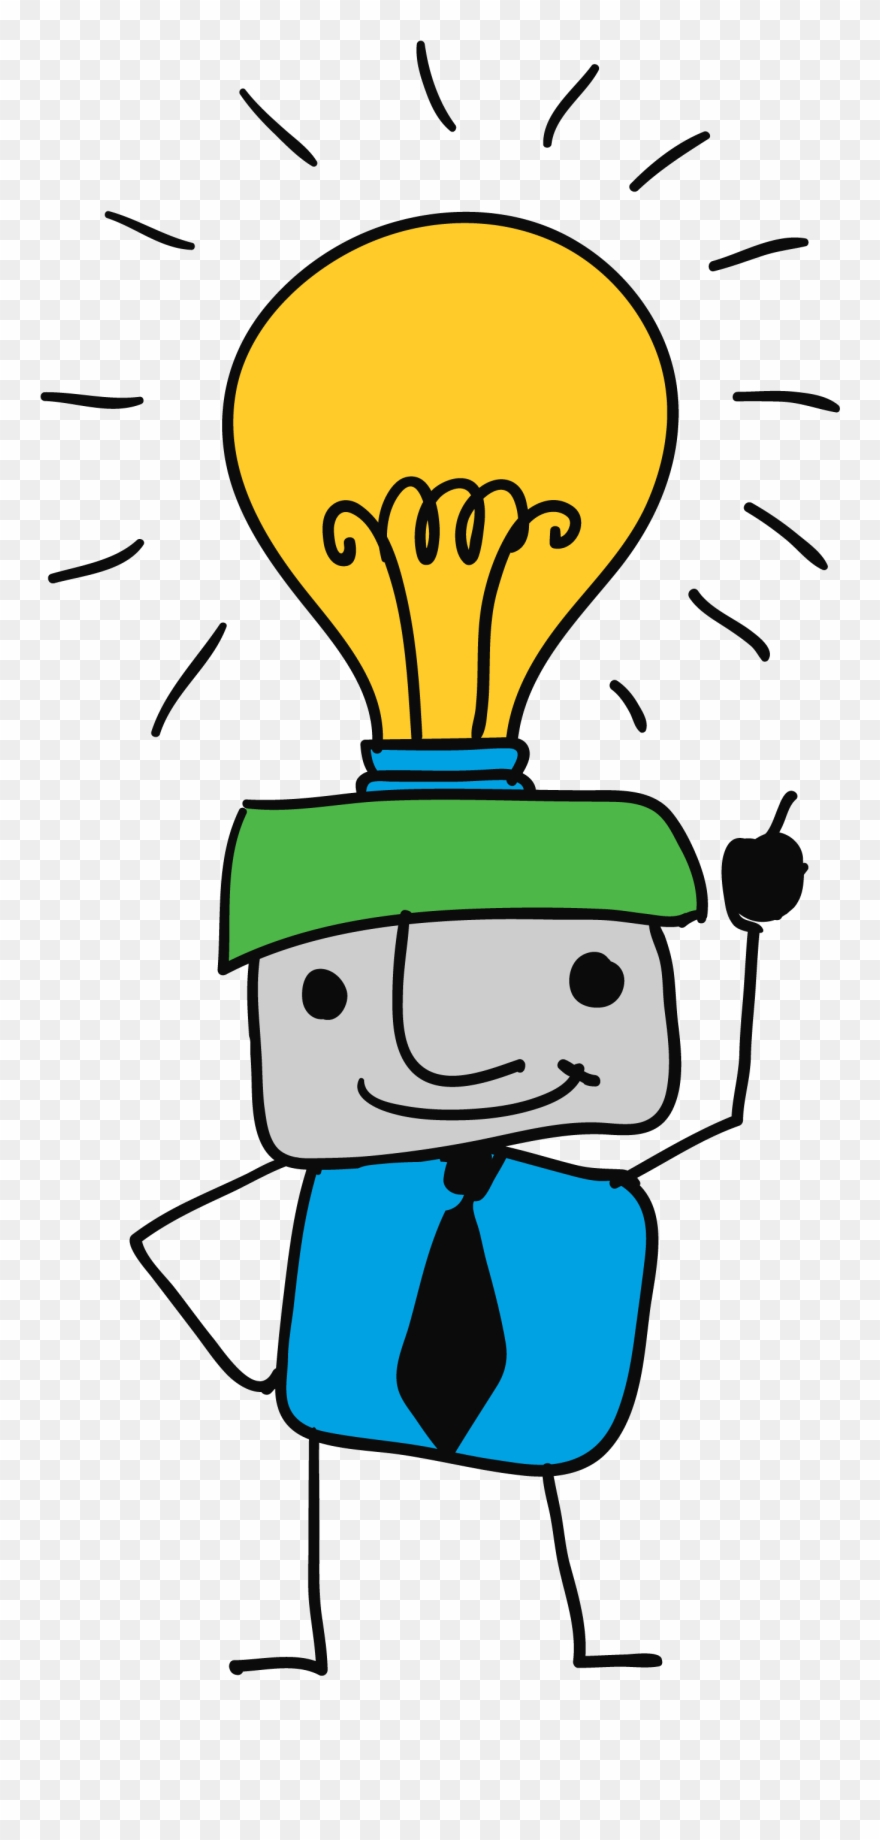 A Drawing Of A Person With A Lit Light Bulb On Their